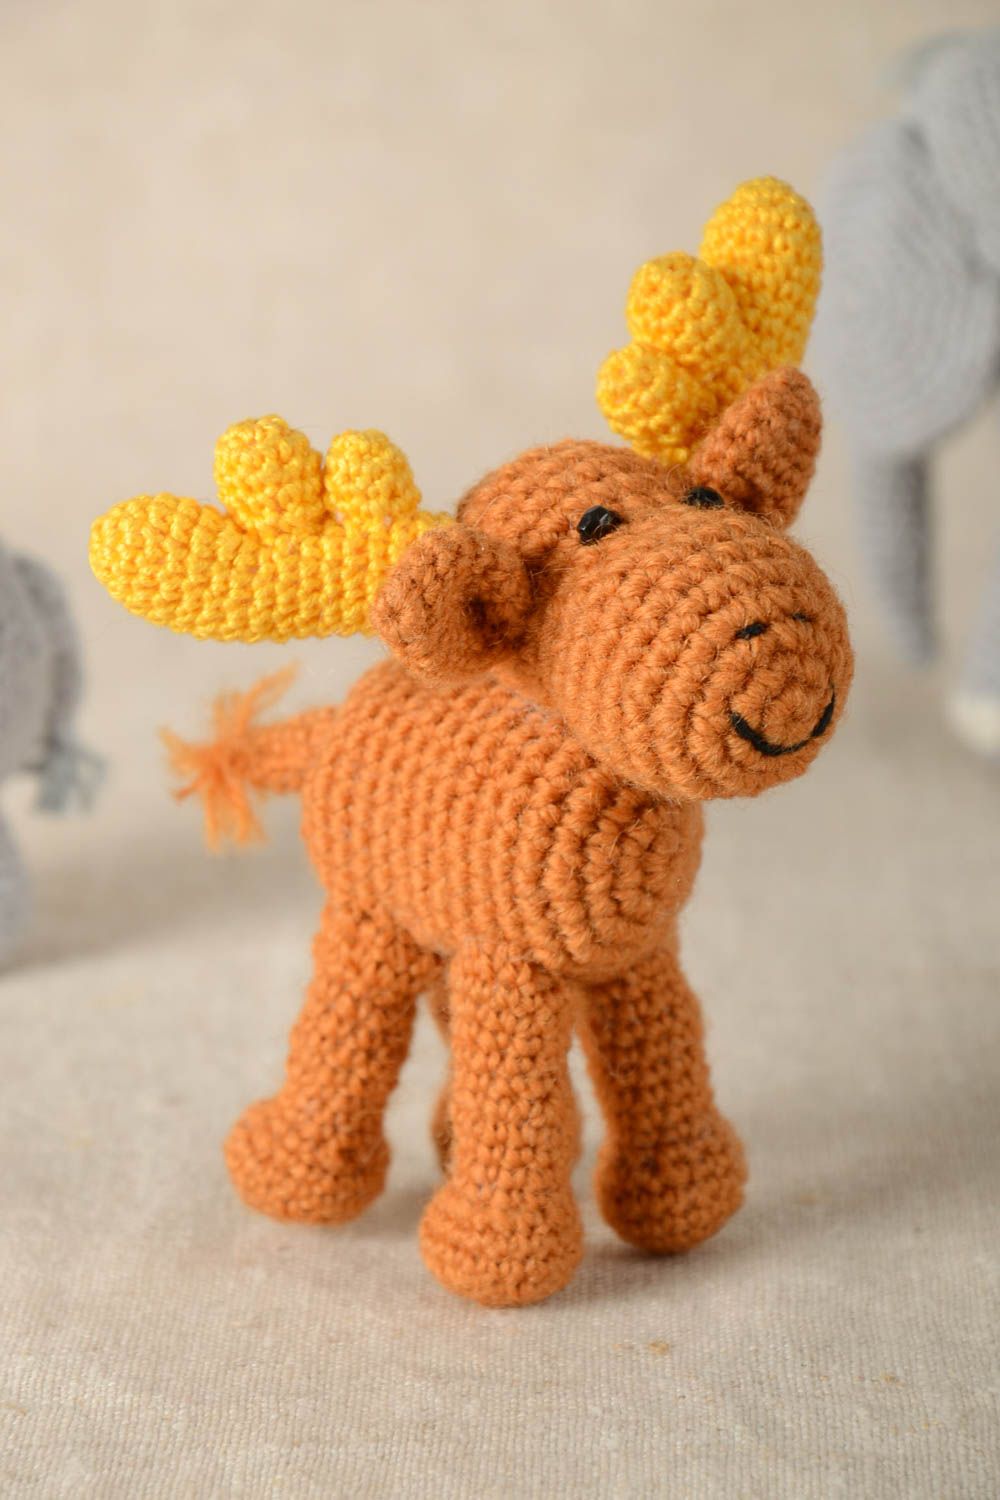 Crocheted handmade toy soft toy for kids textile present home decor kids gift photo 1